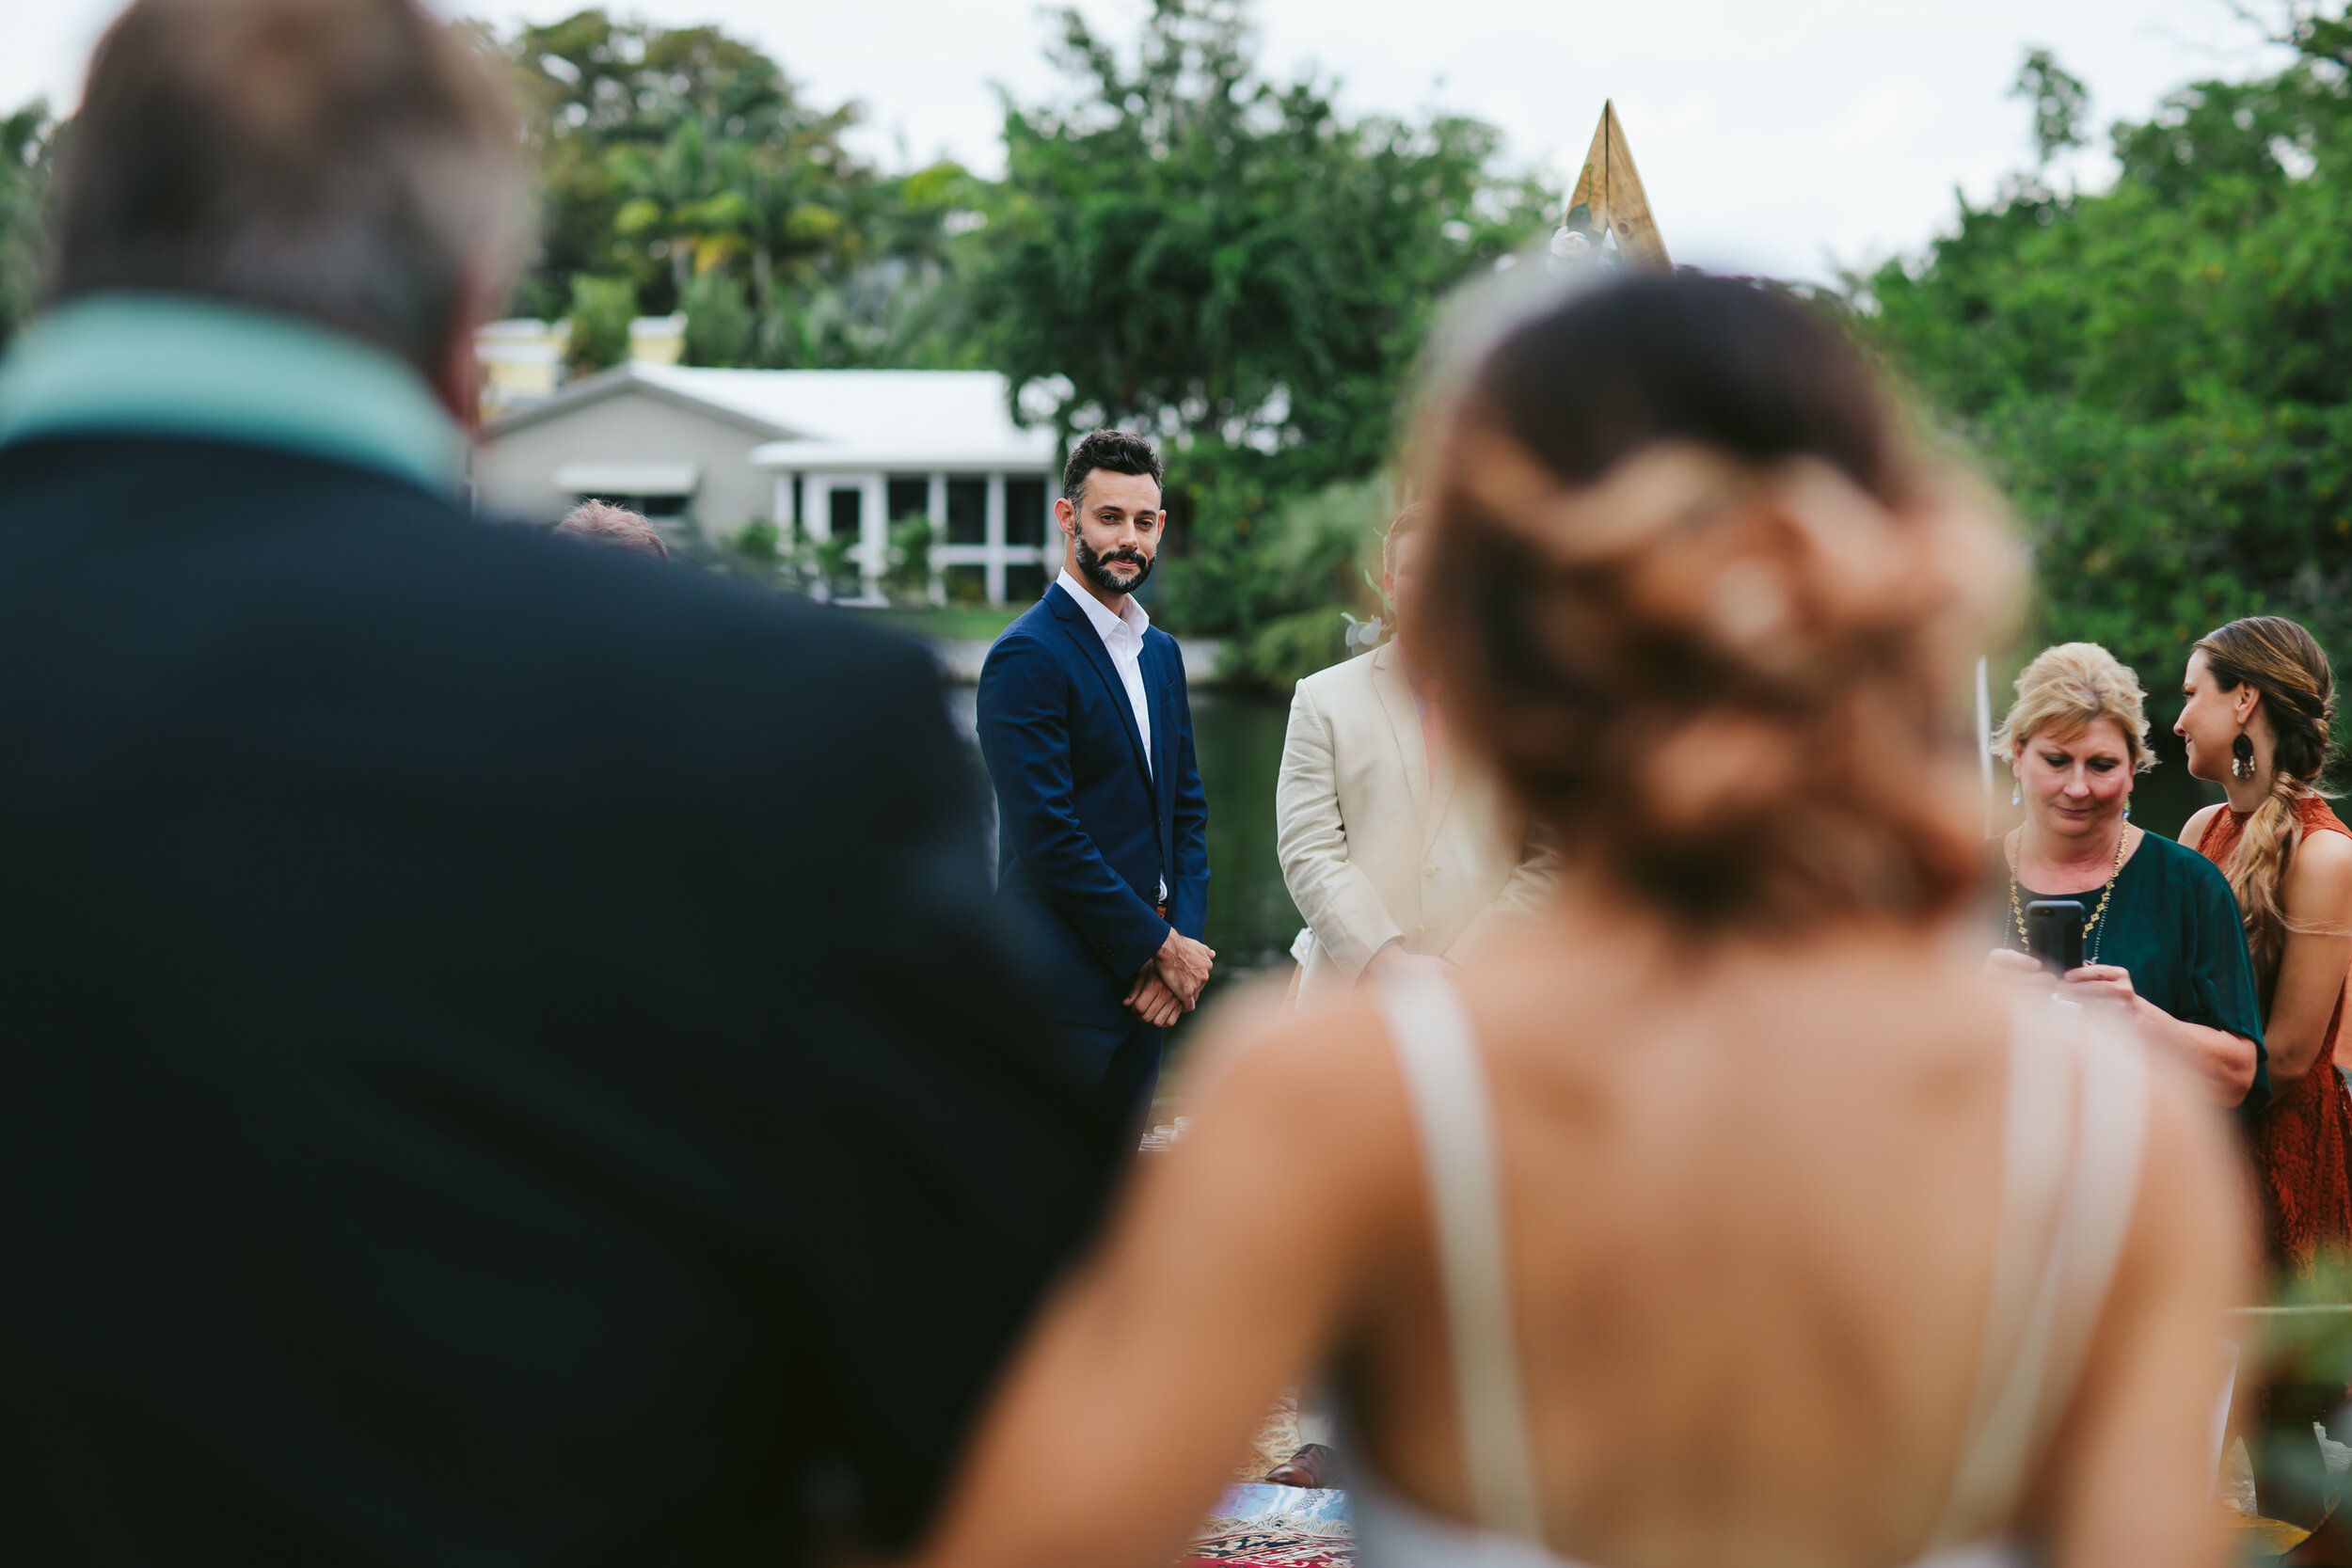 Groom sees bride for first time